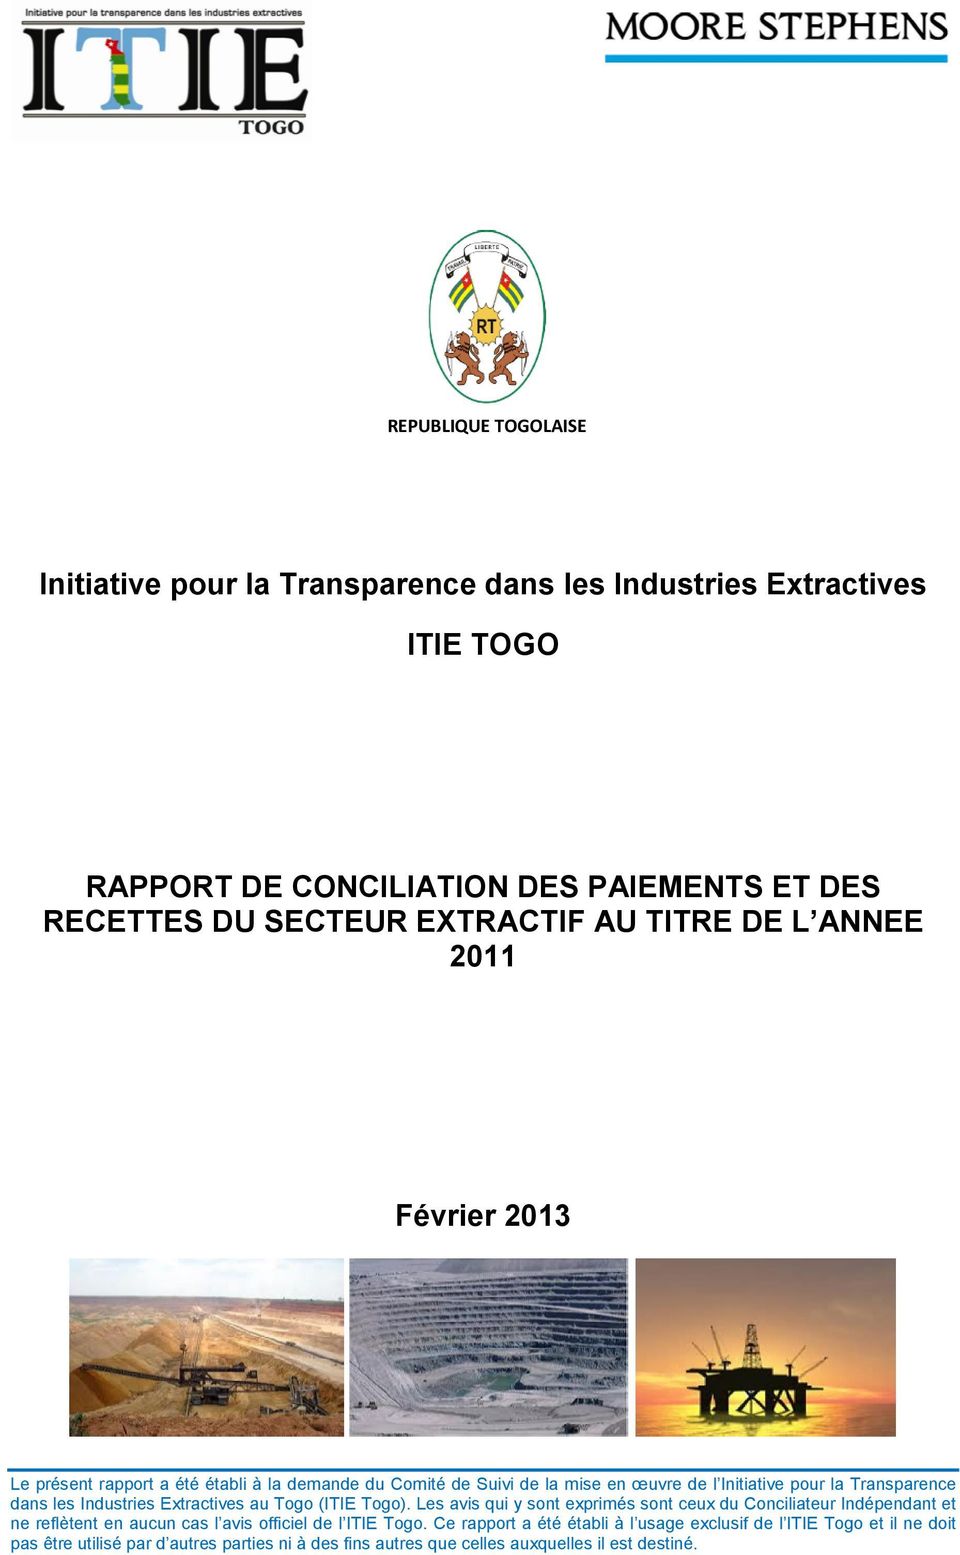 Industries Extractives au Togo (ITIE Togo).